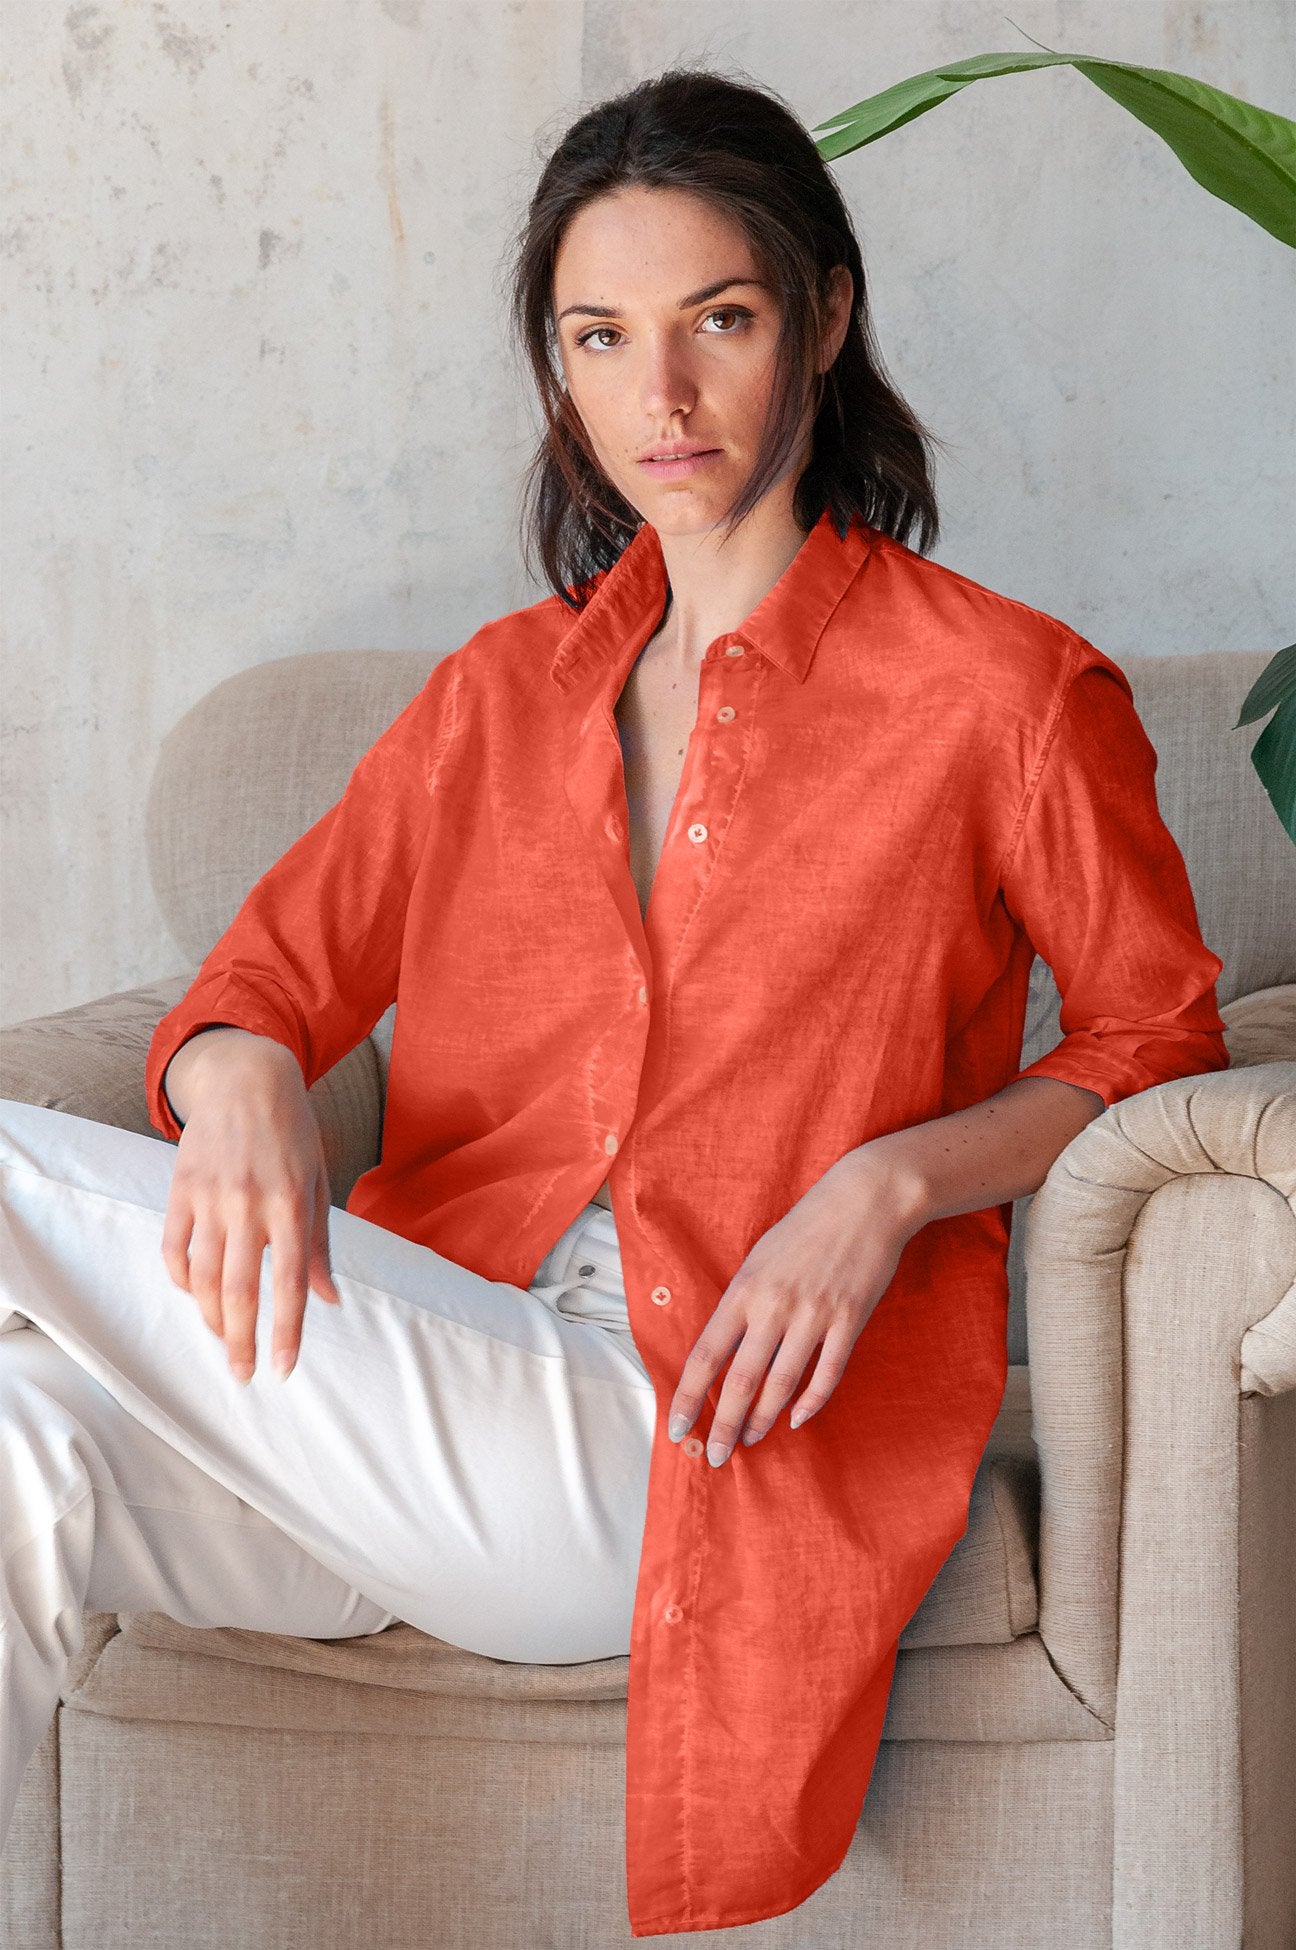 Effortless Voile Open Tunic - Corallo - Shirtdress